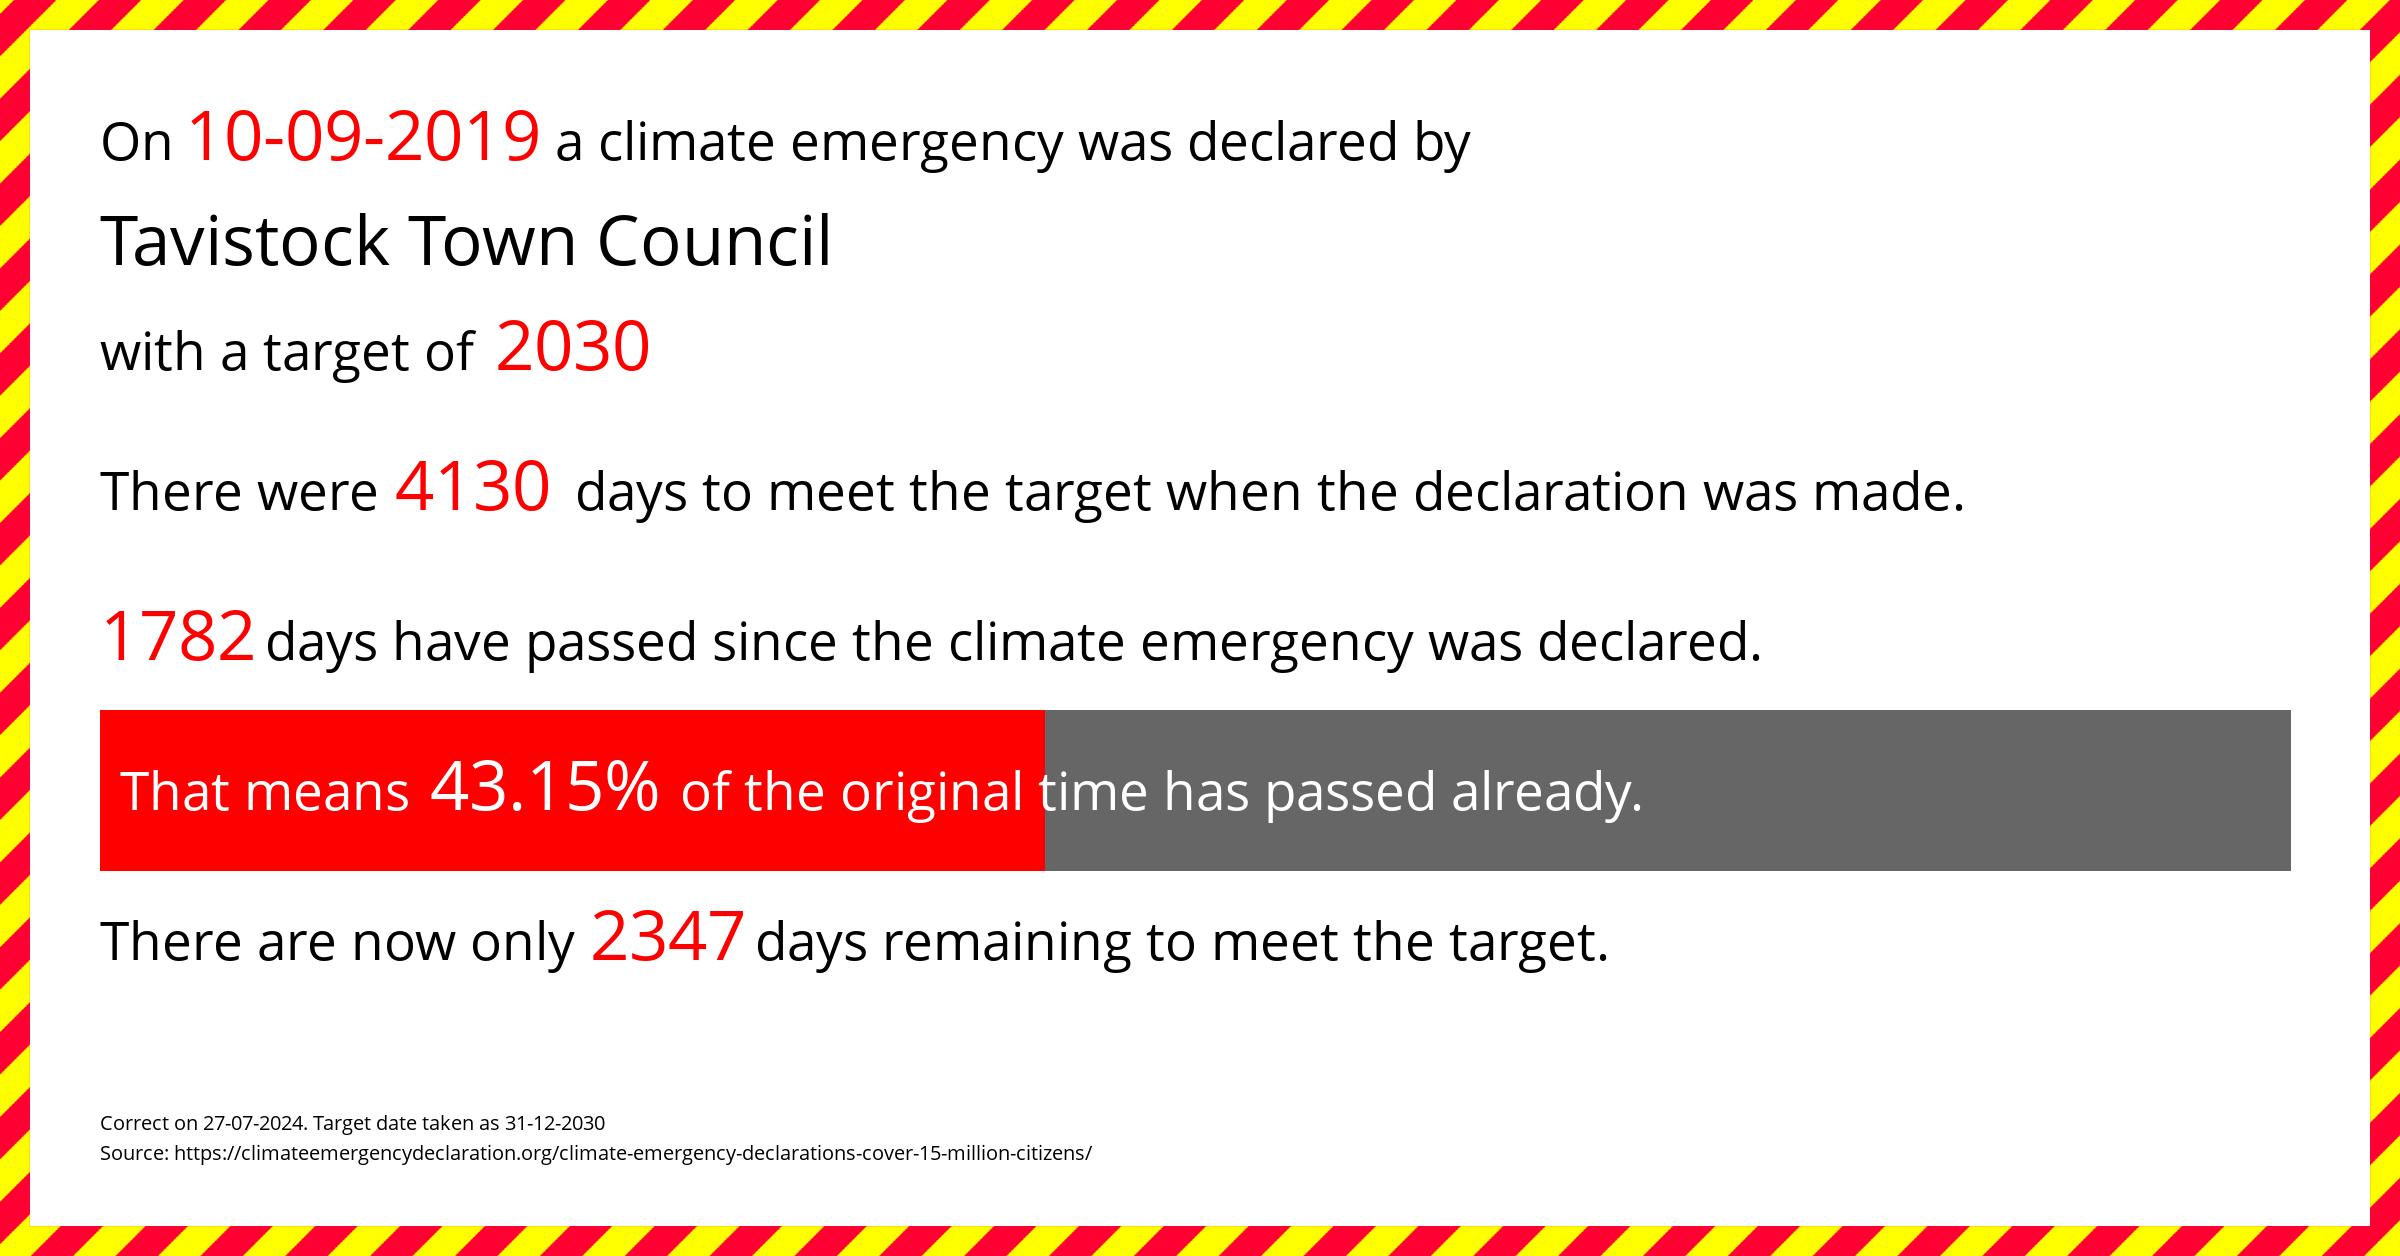 Tavistock Town Council declared a Climate emergency on Tuesday 10th September 2019, with a target of 2030.